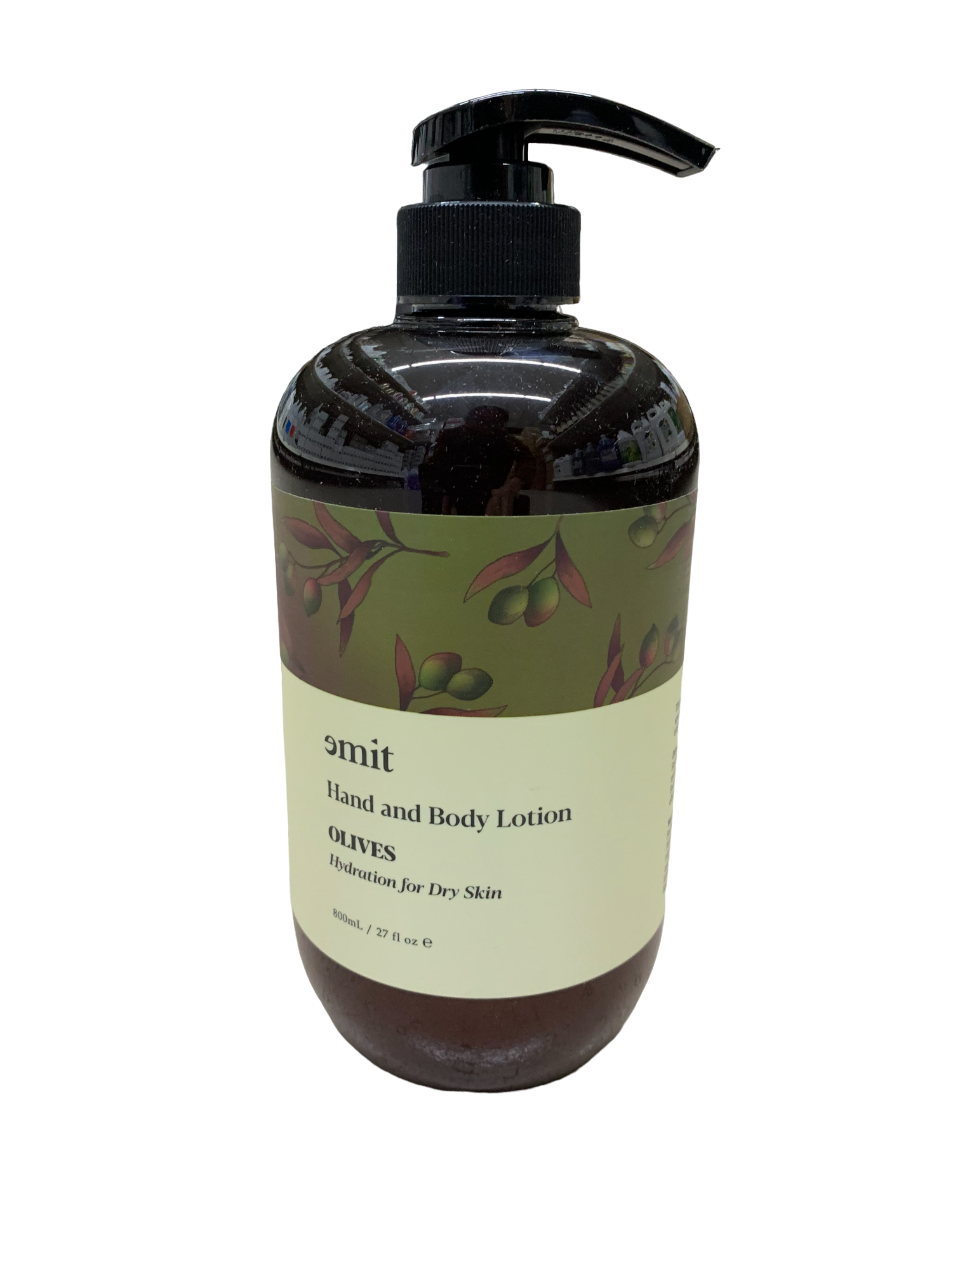 Emit Hand and Body Lotion Olives